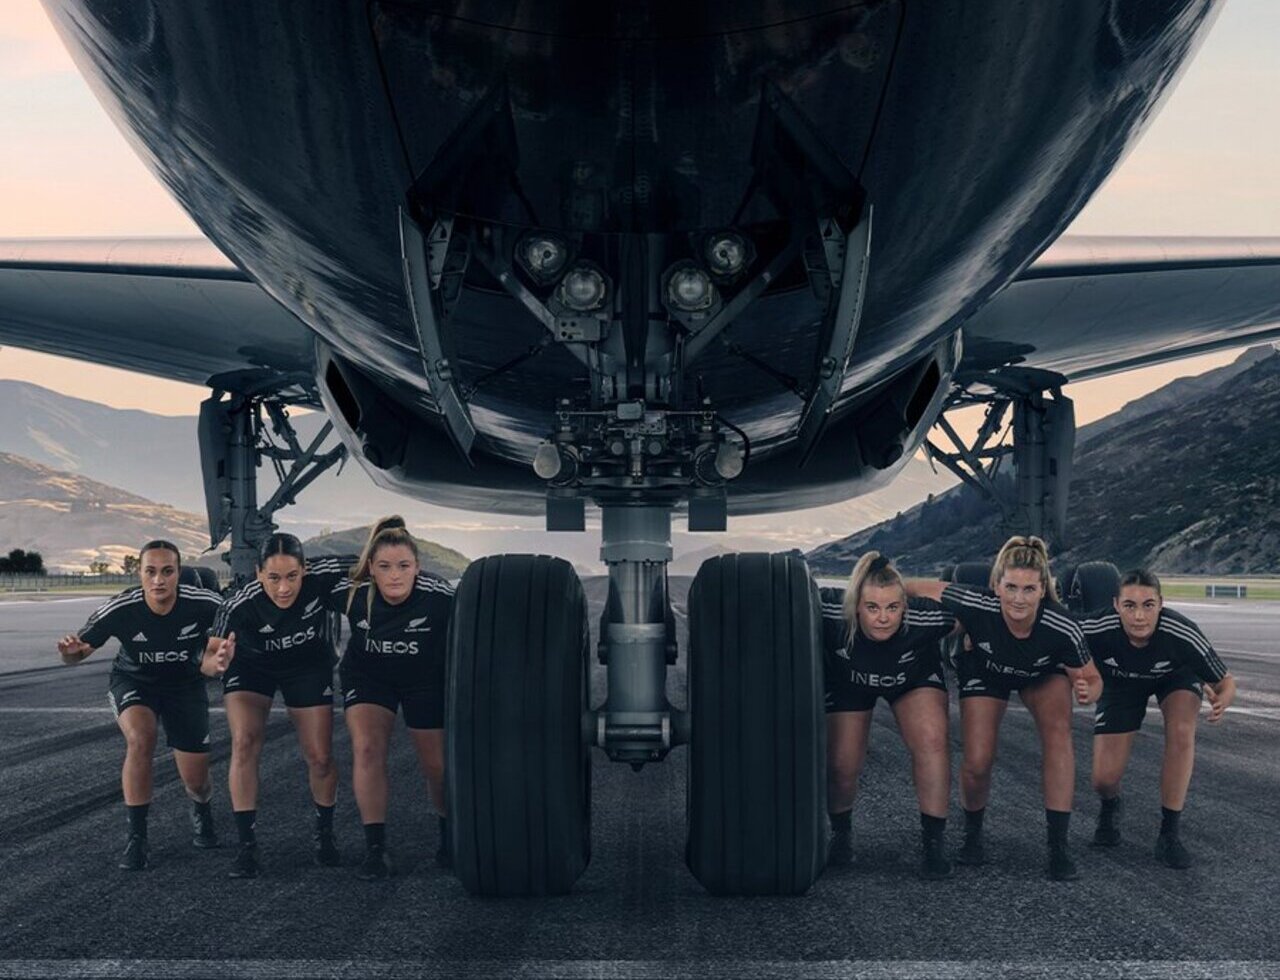 Team members of the Black Ferns pose with an Air New Zealand aircraft.